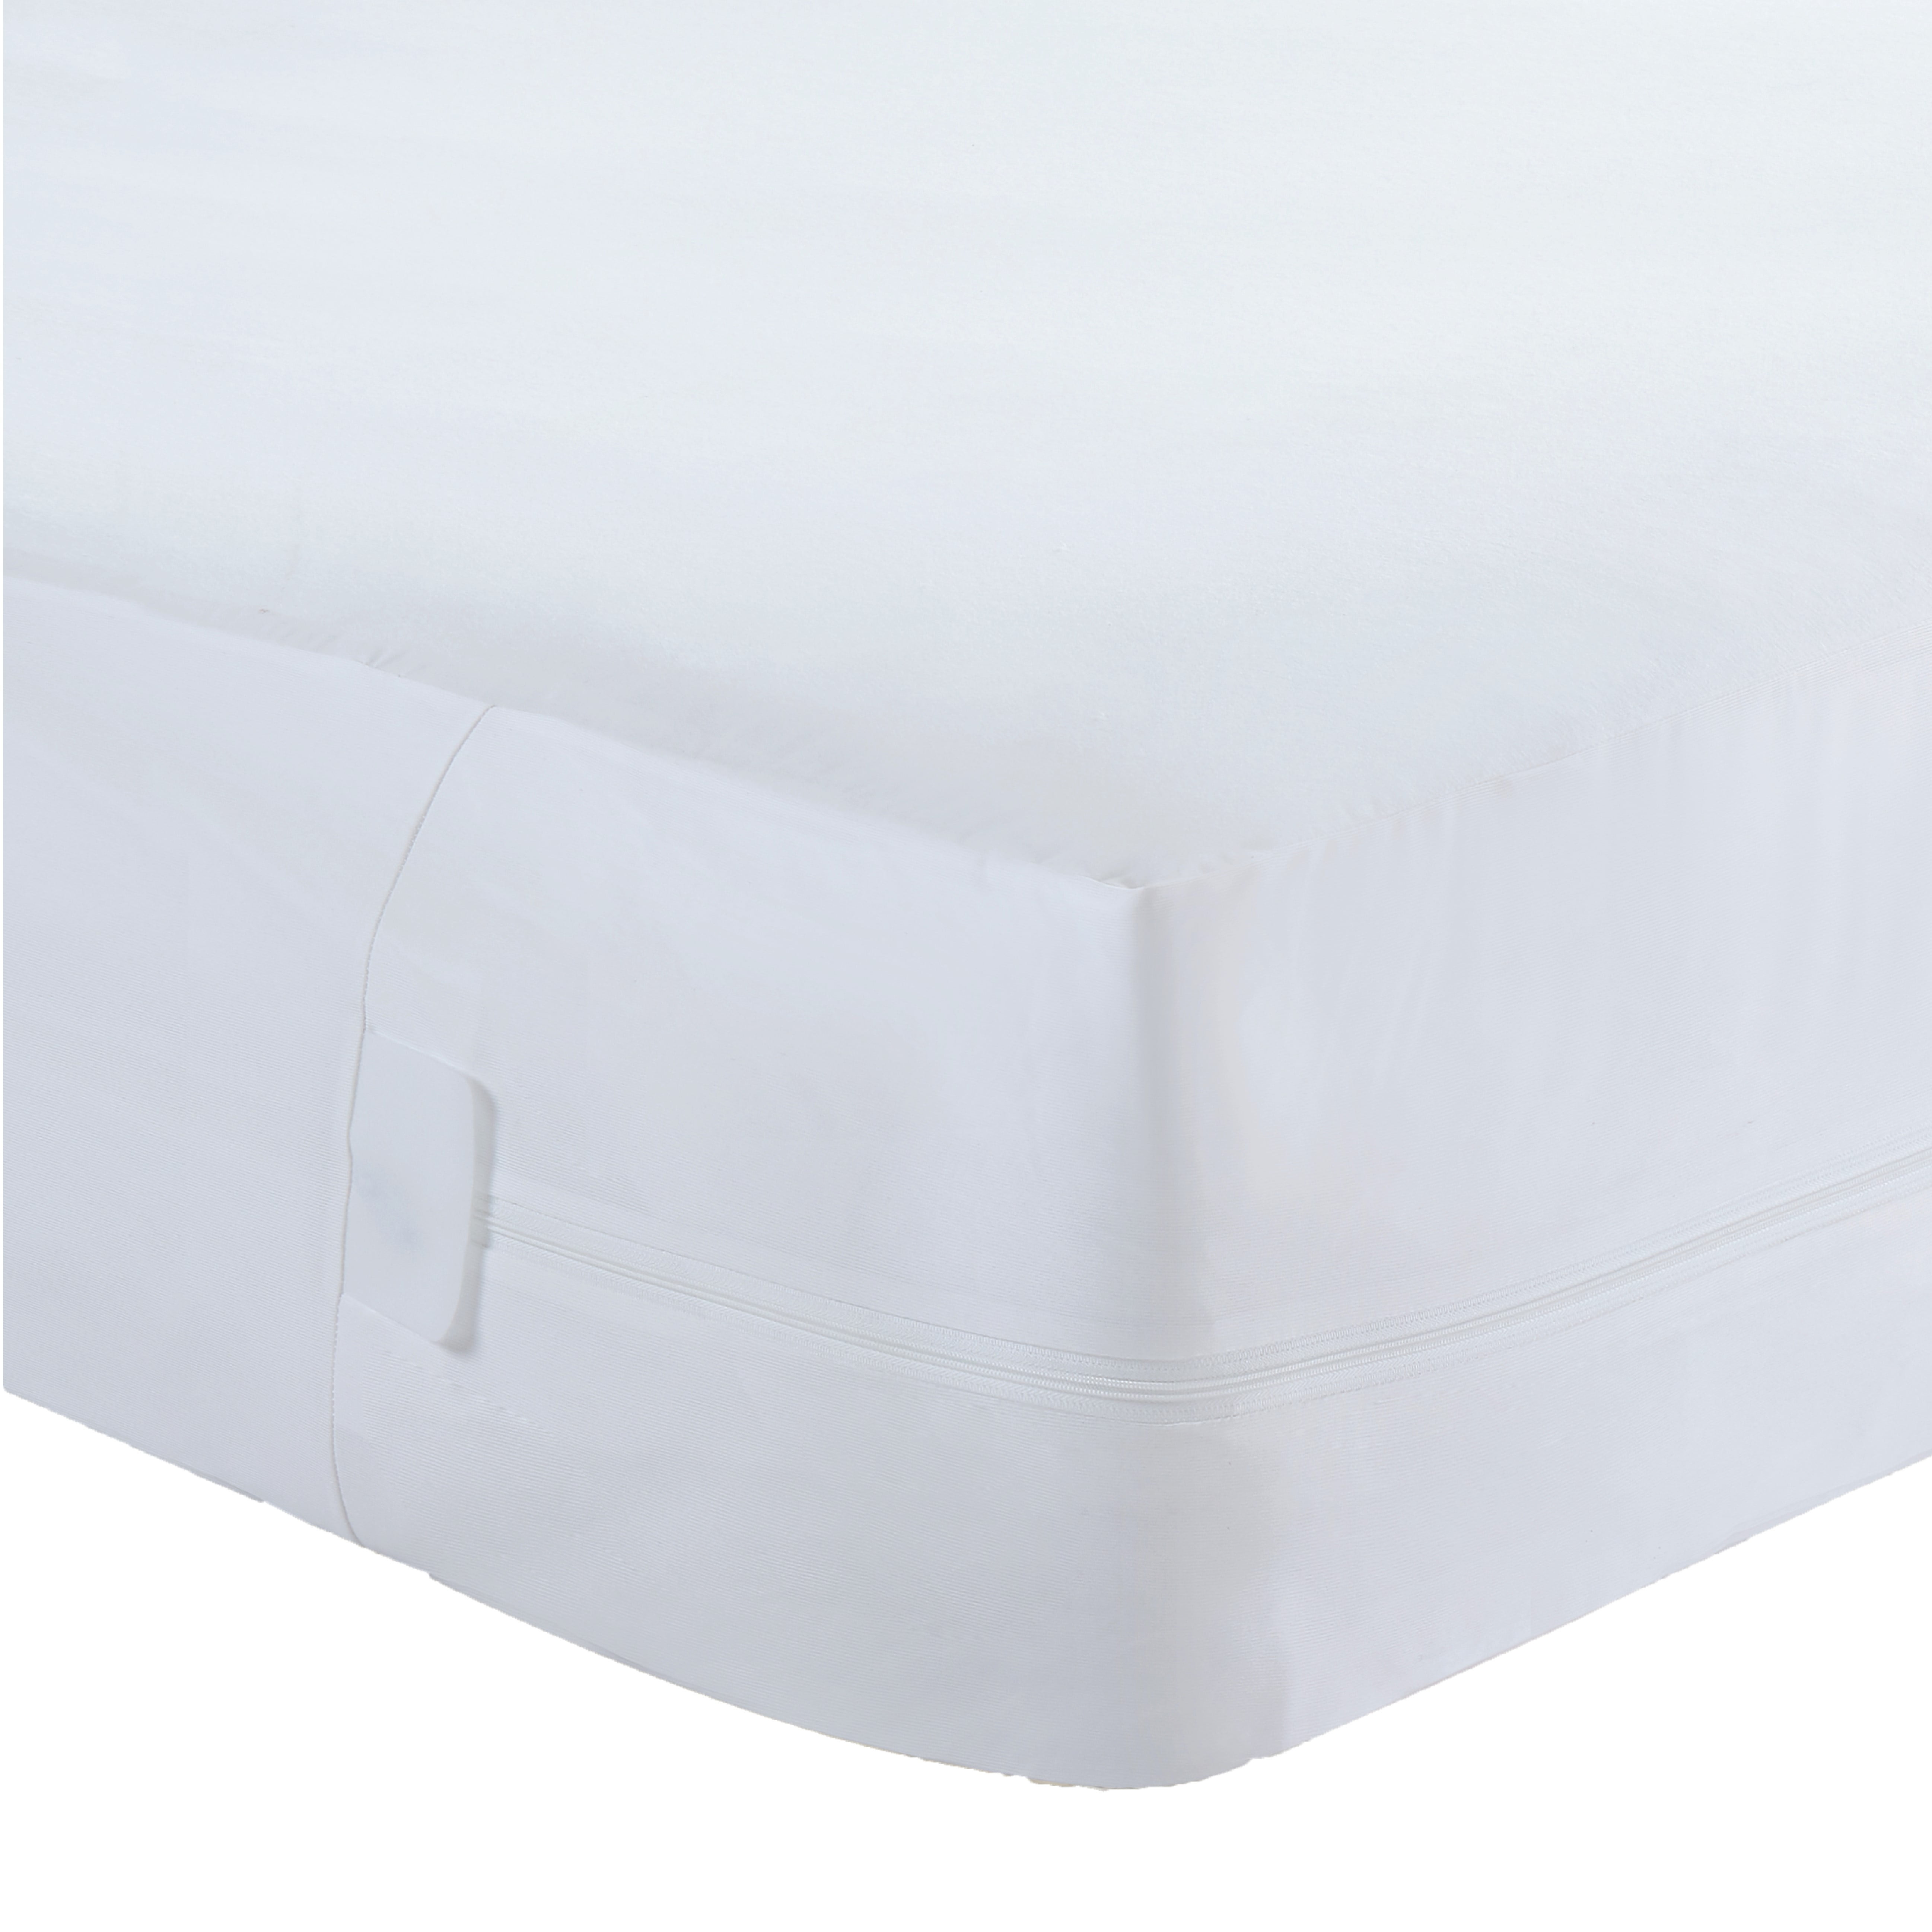 BSENSIBLE KIDS TWIN FULL SIZE BED FITTED SHEET WATERPROOF MATTRESS PROTECTOR x1 